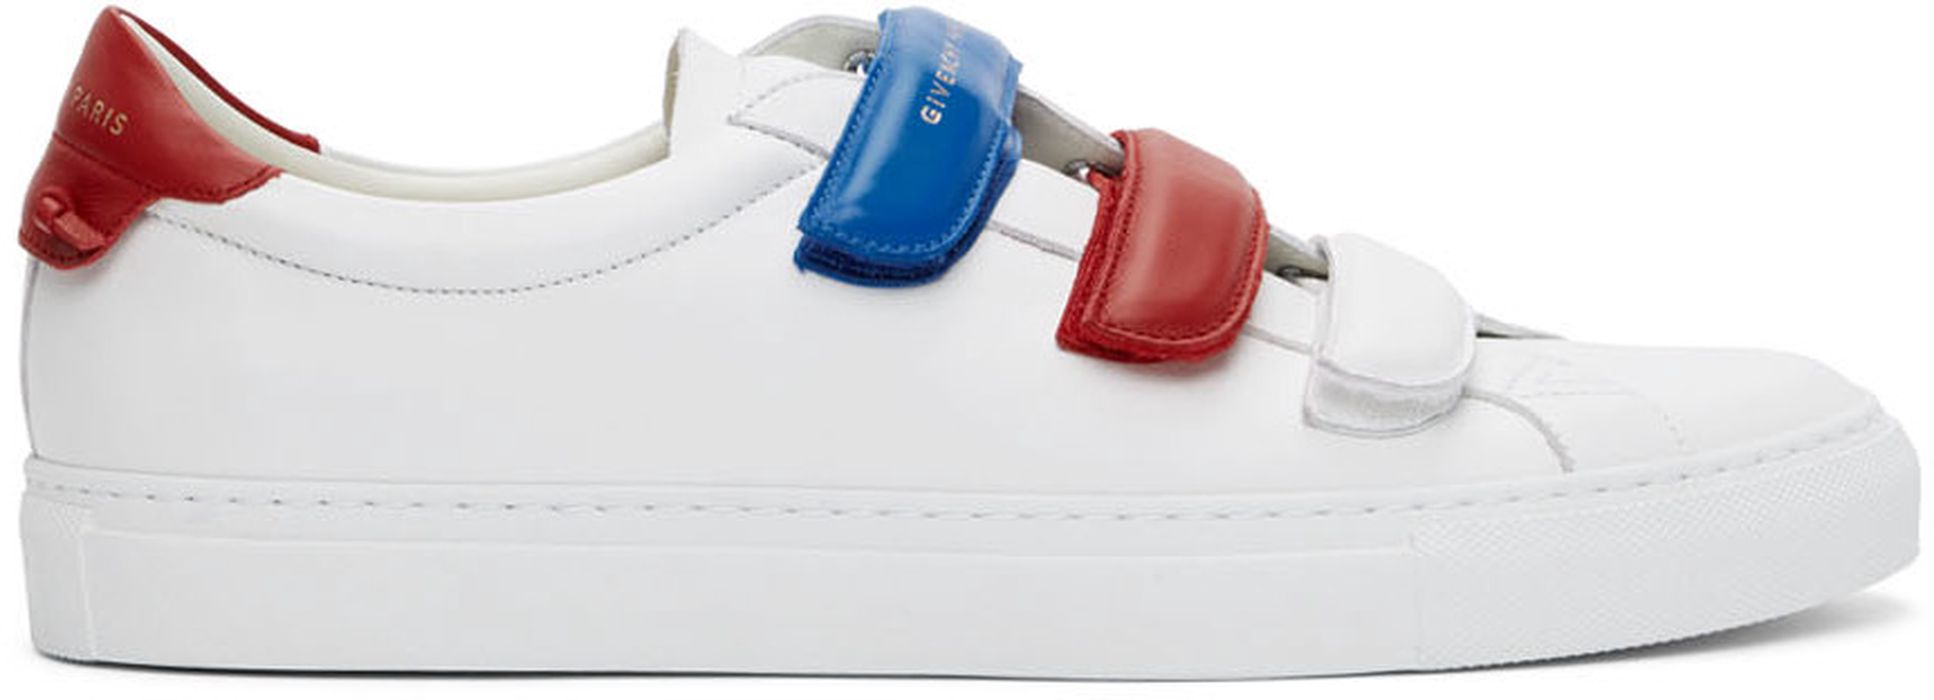 Givenchy White & Red Velcro Urban Knots Sneakers